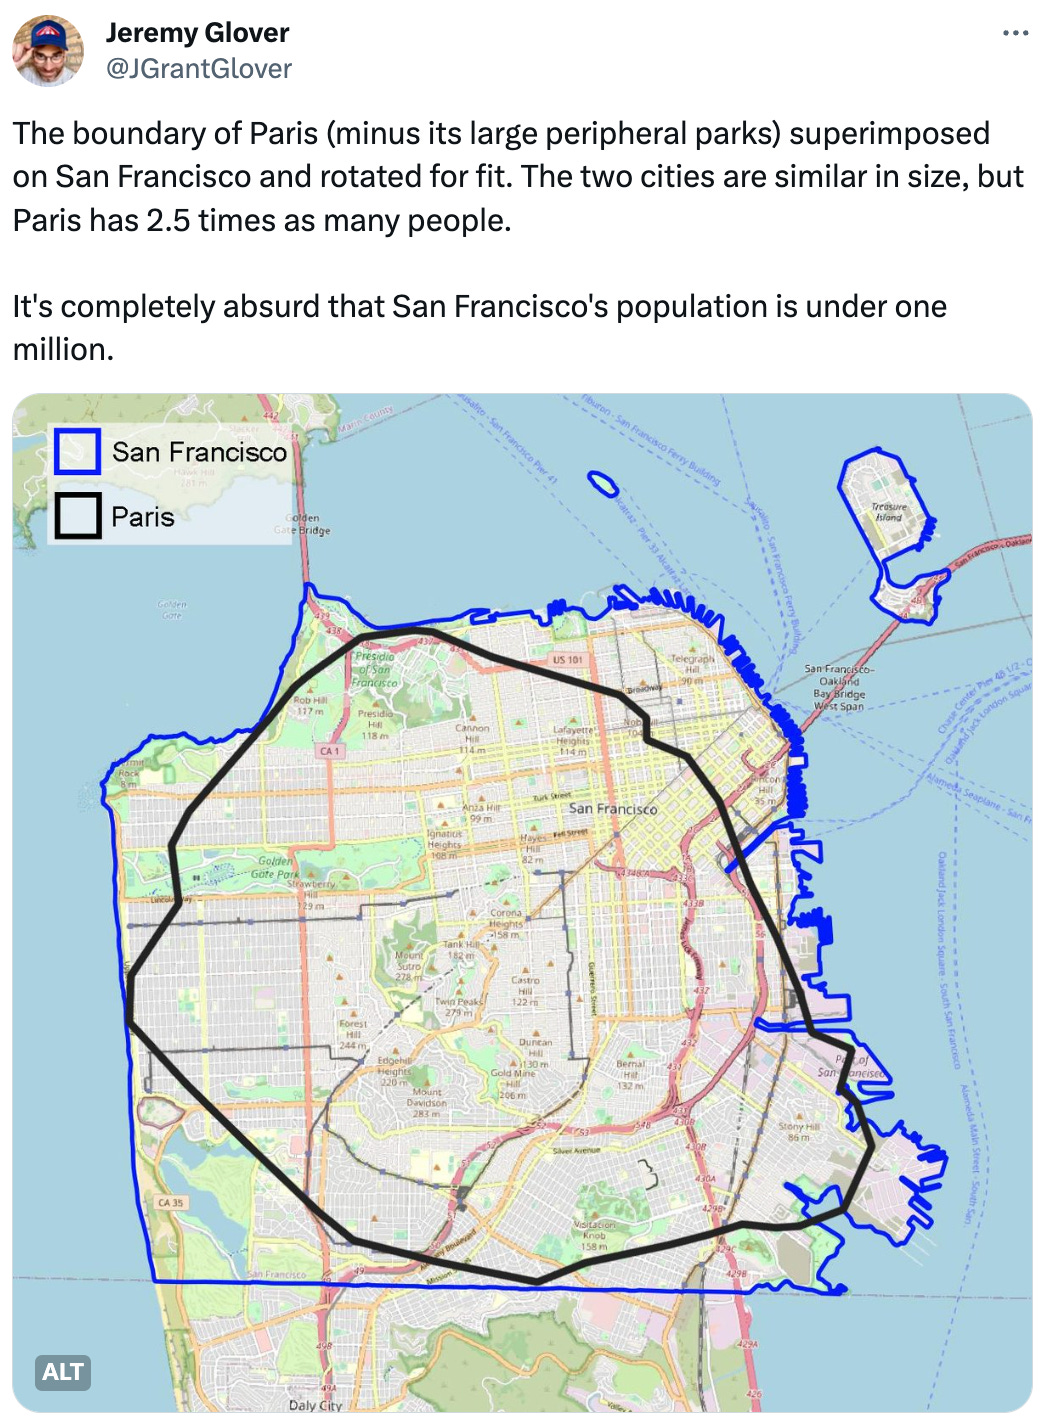  See new posts Conversation Jeremy Glover @JGrantGlover The boundary of Paris (minus its large peripheral parks) superimposed on San Francisco and rotated for fit. The two cities are similar in size, but Paris has 2.5 times as many people.  It's completely absurd that San Francisco's population is under one million.